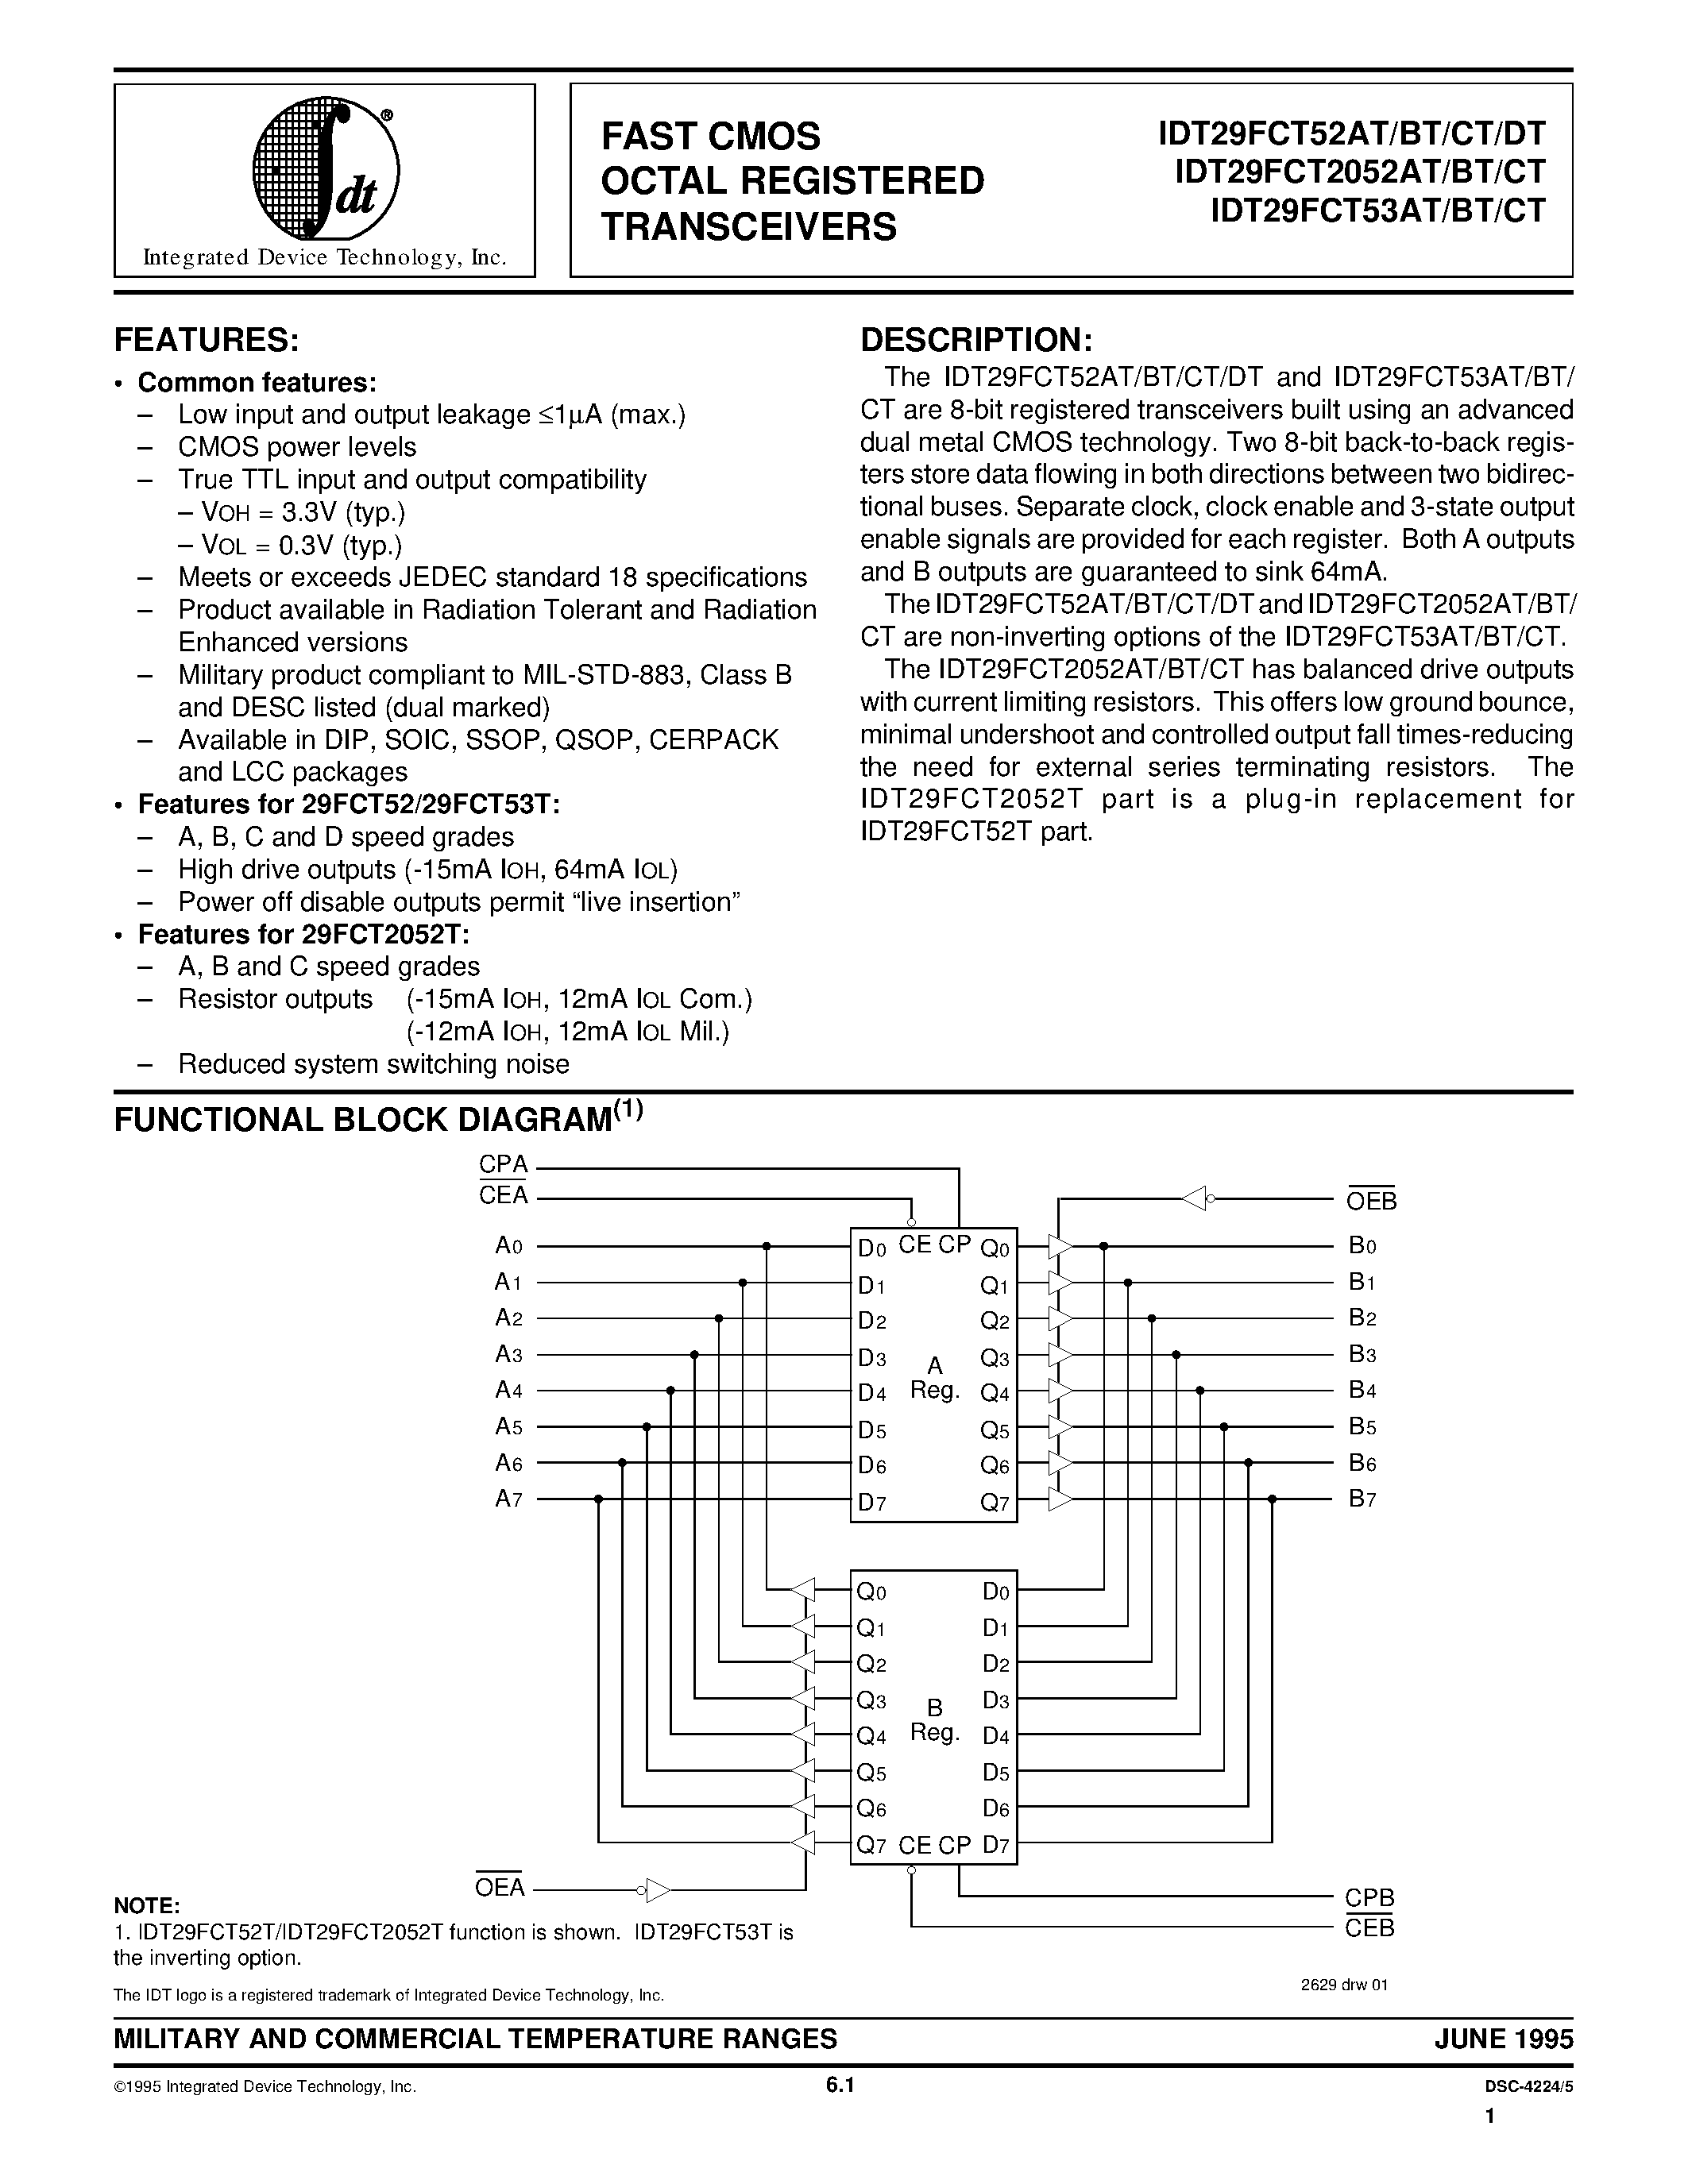 Datasheet 7429FCT53CTLB - FAST CMOS OCTAL REGISTERED TRANSCEIVERS page 1